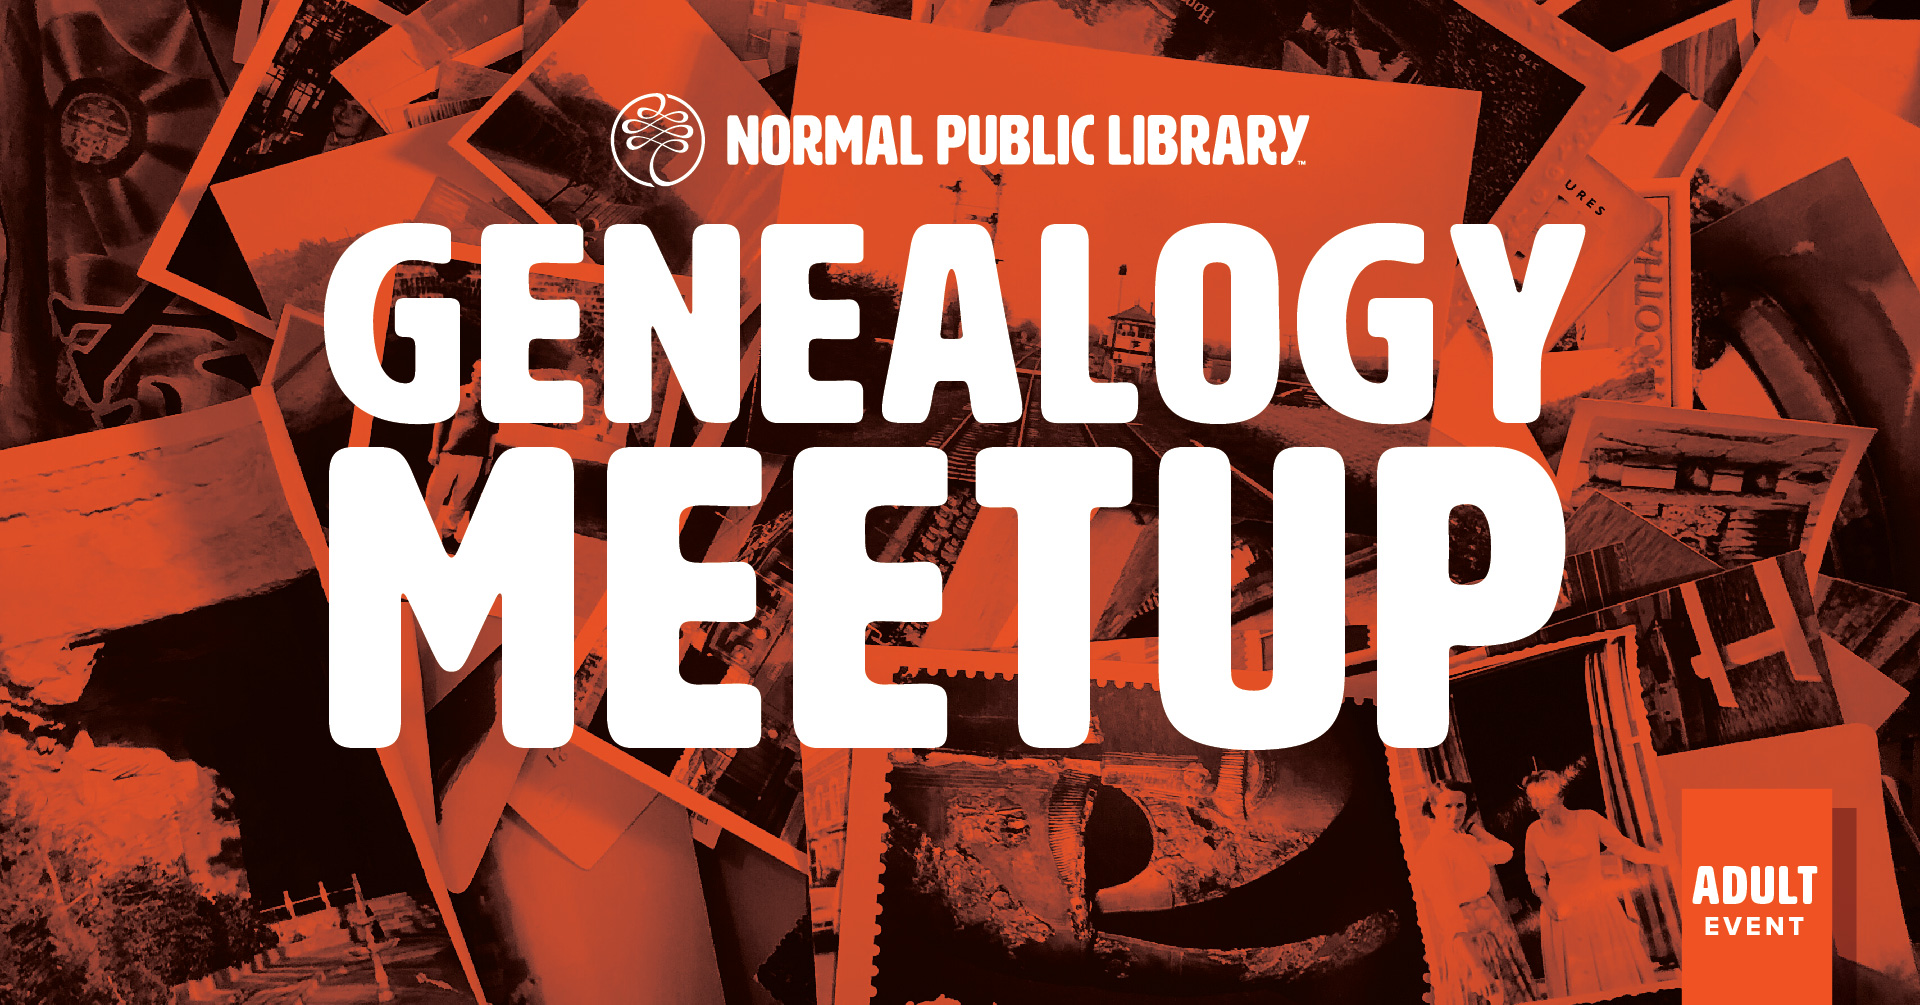 Image for Genealogy Meetup.